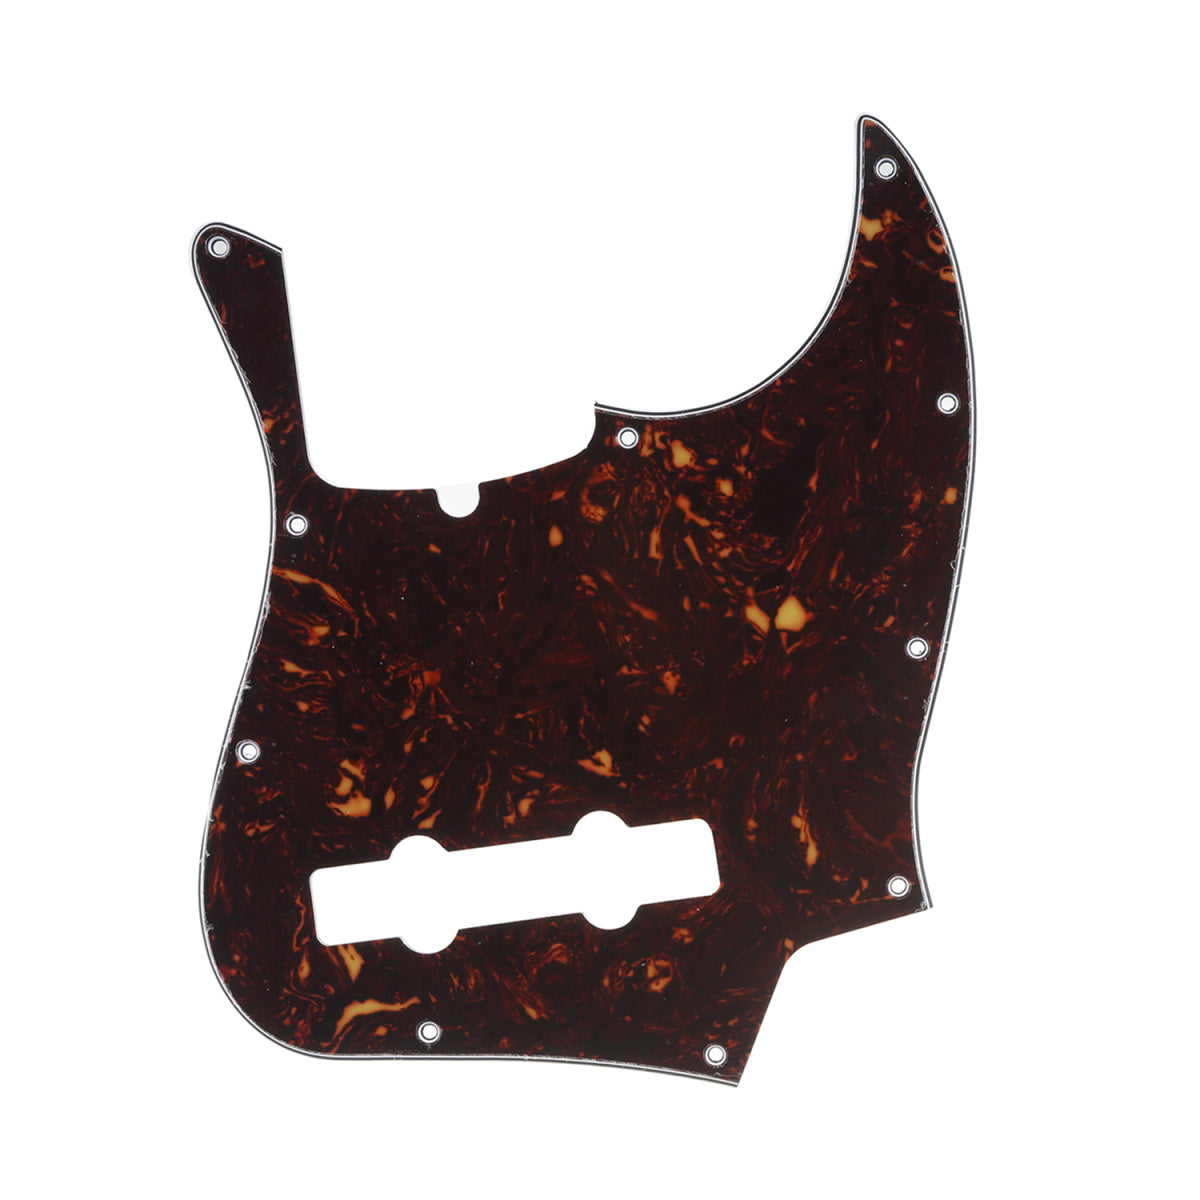 Musiclily Pro 10-Hole Contemporary J Bass Pickguard for Fender Jazz Bass American 5-String, 4Ply Tortoise Shell